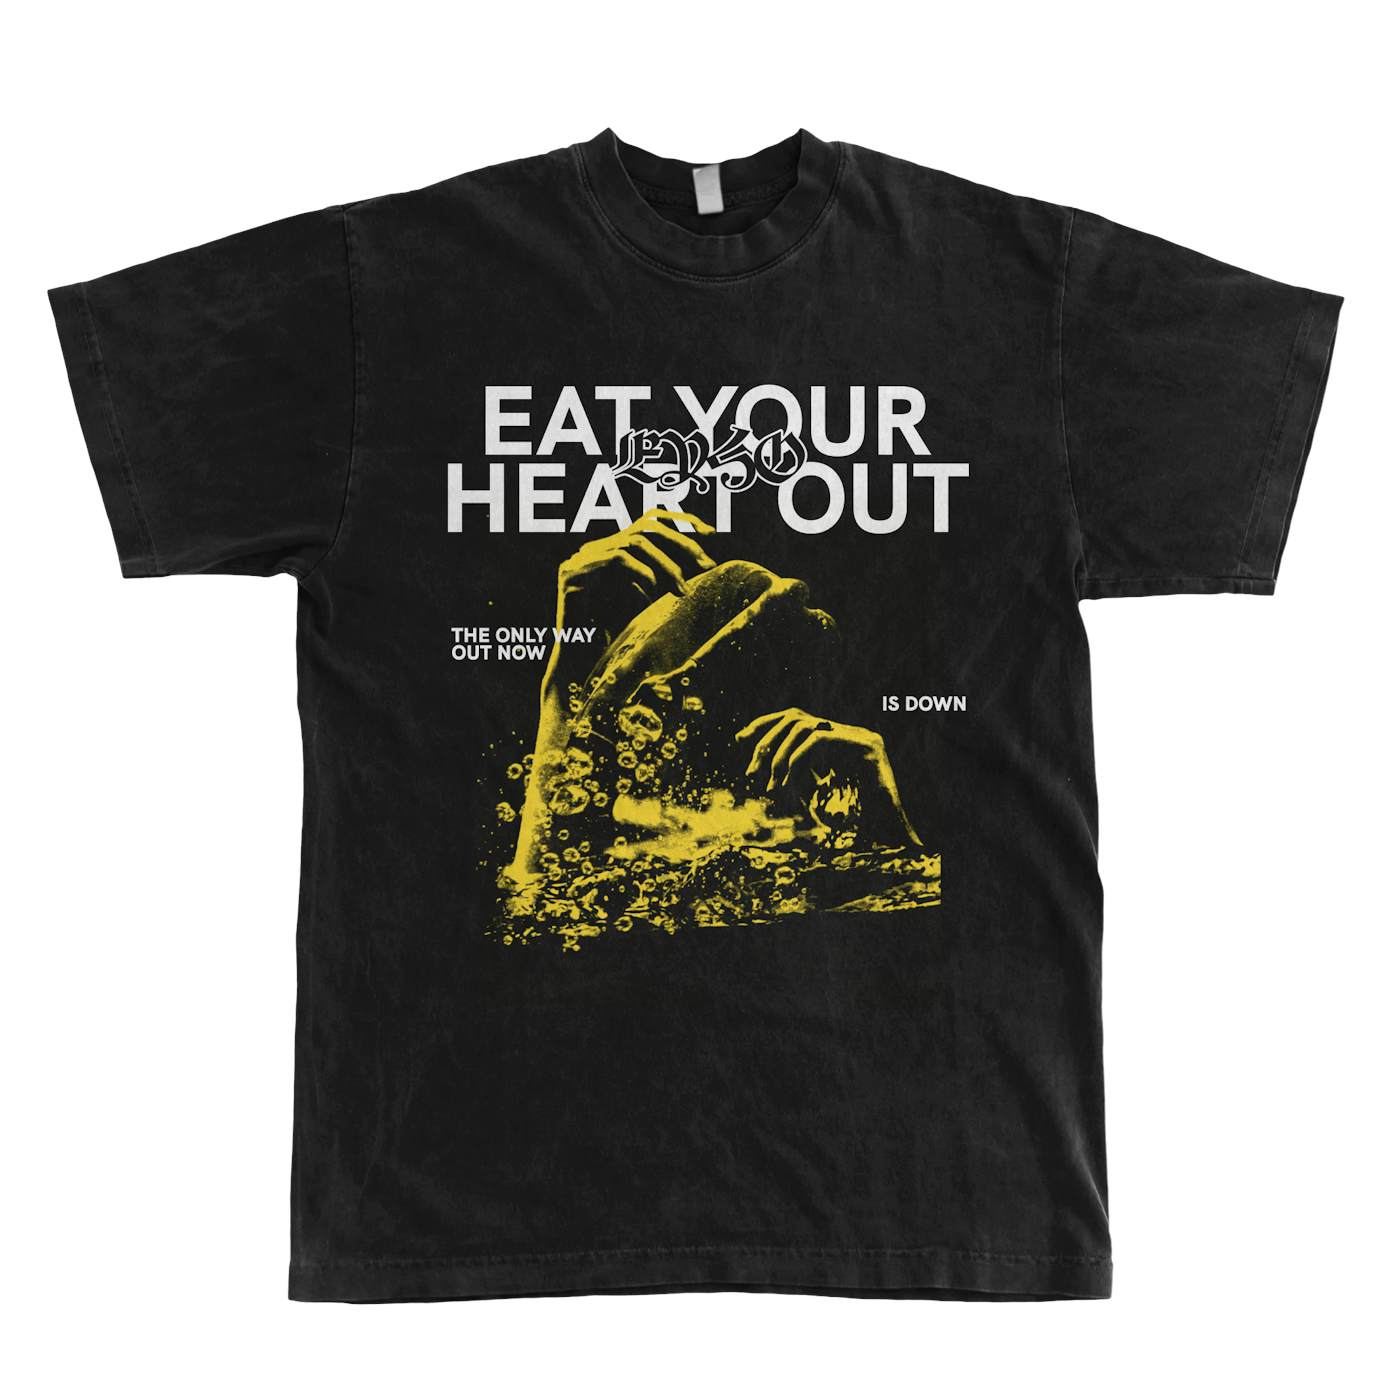 Eat Your Heart Out "Only Way Out" T-Shirt